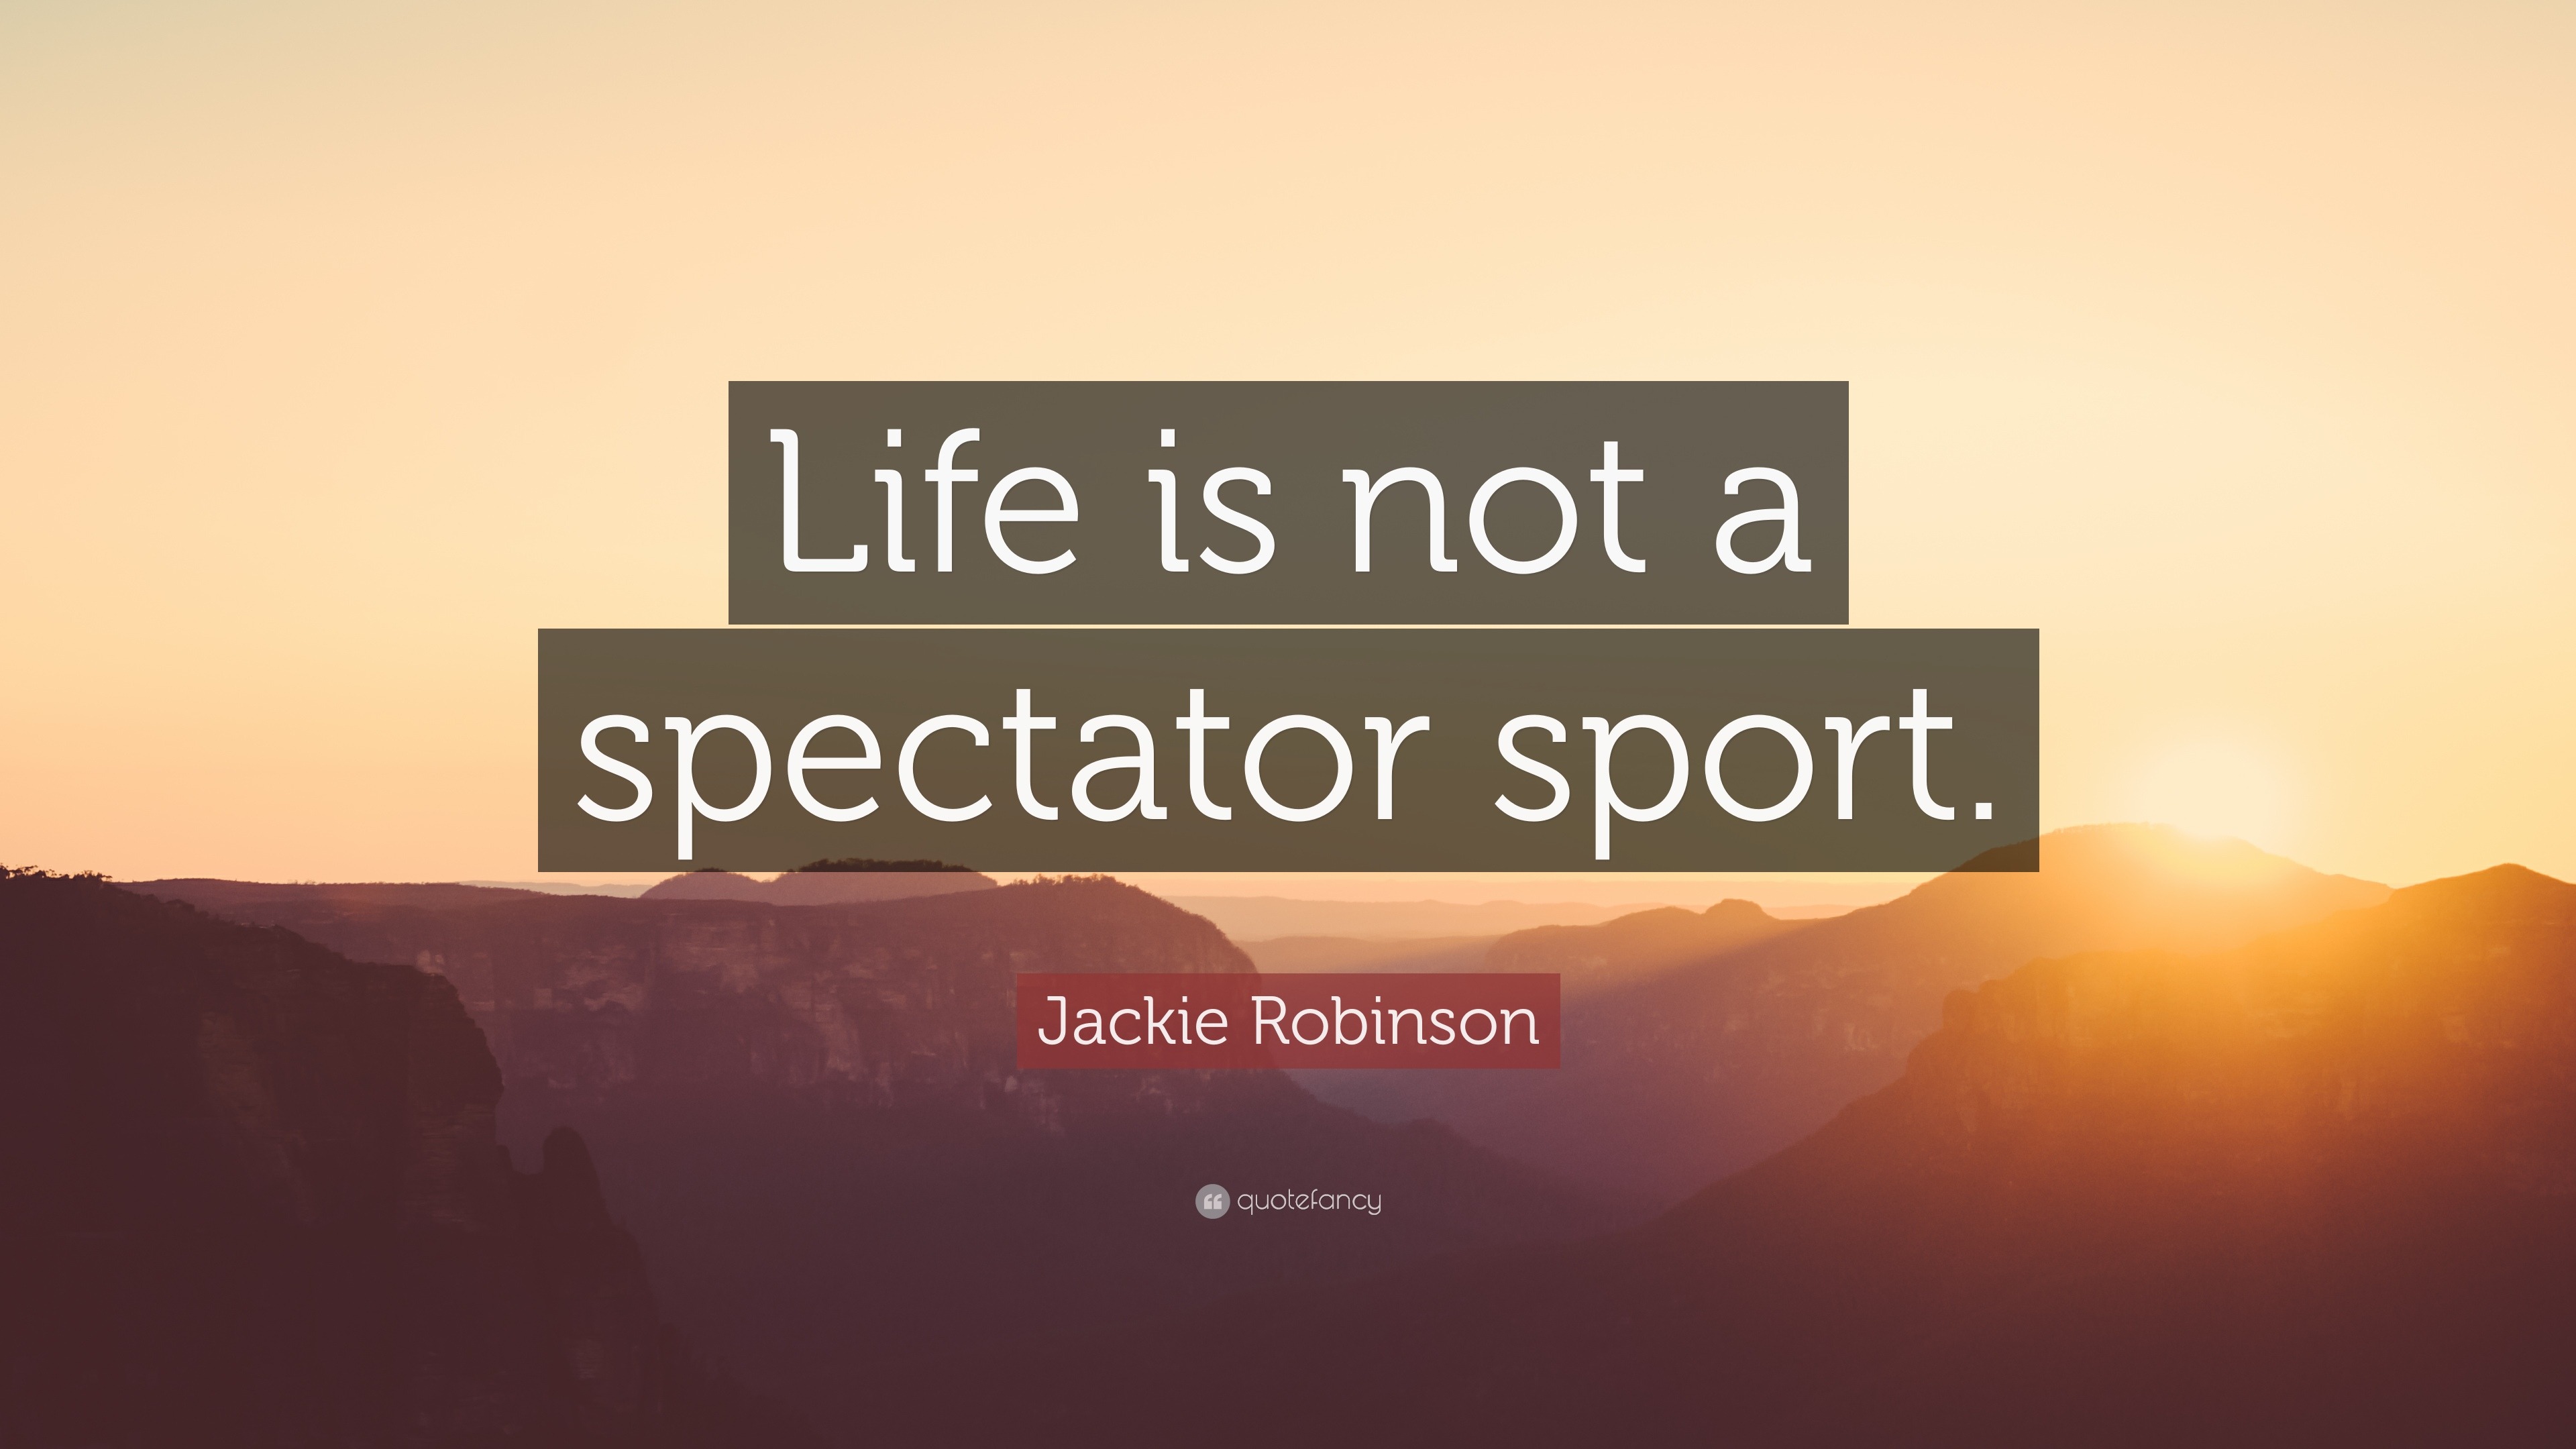 Top 30 Jackie Robinson Quotes (2023 Update) - QuoteFancy